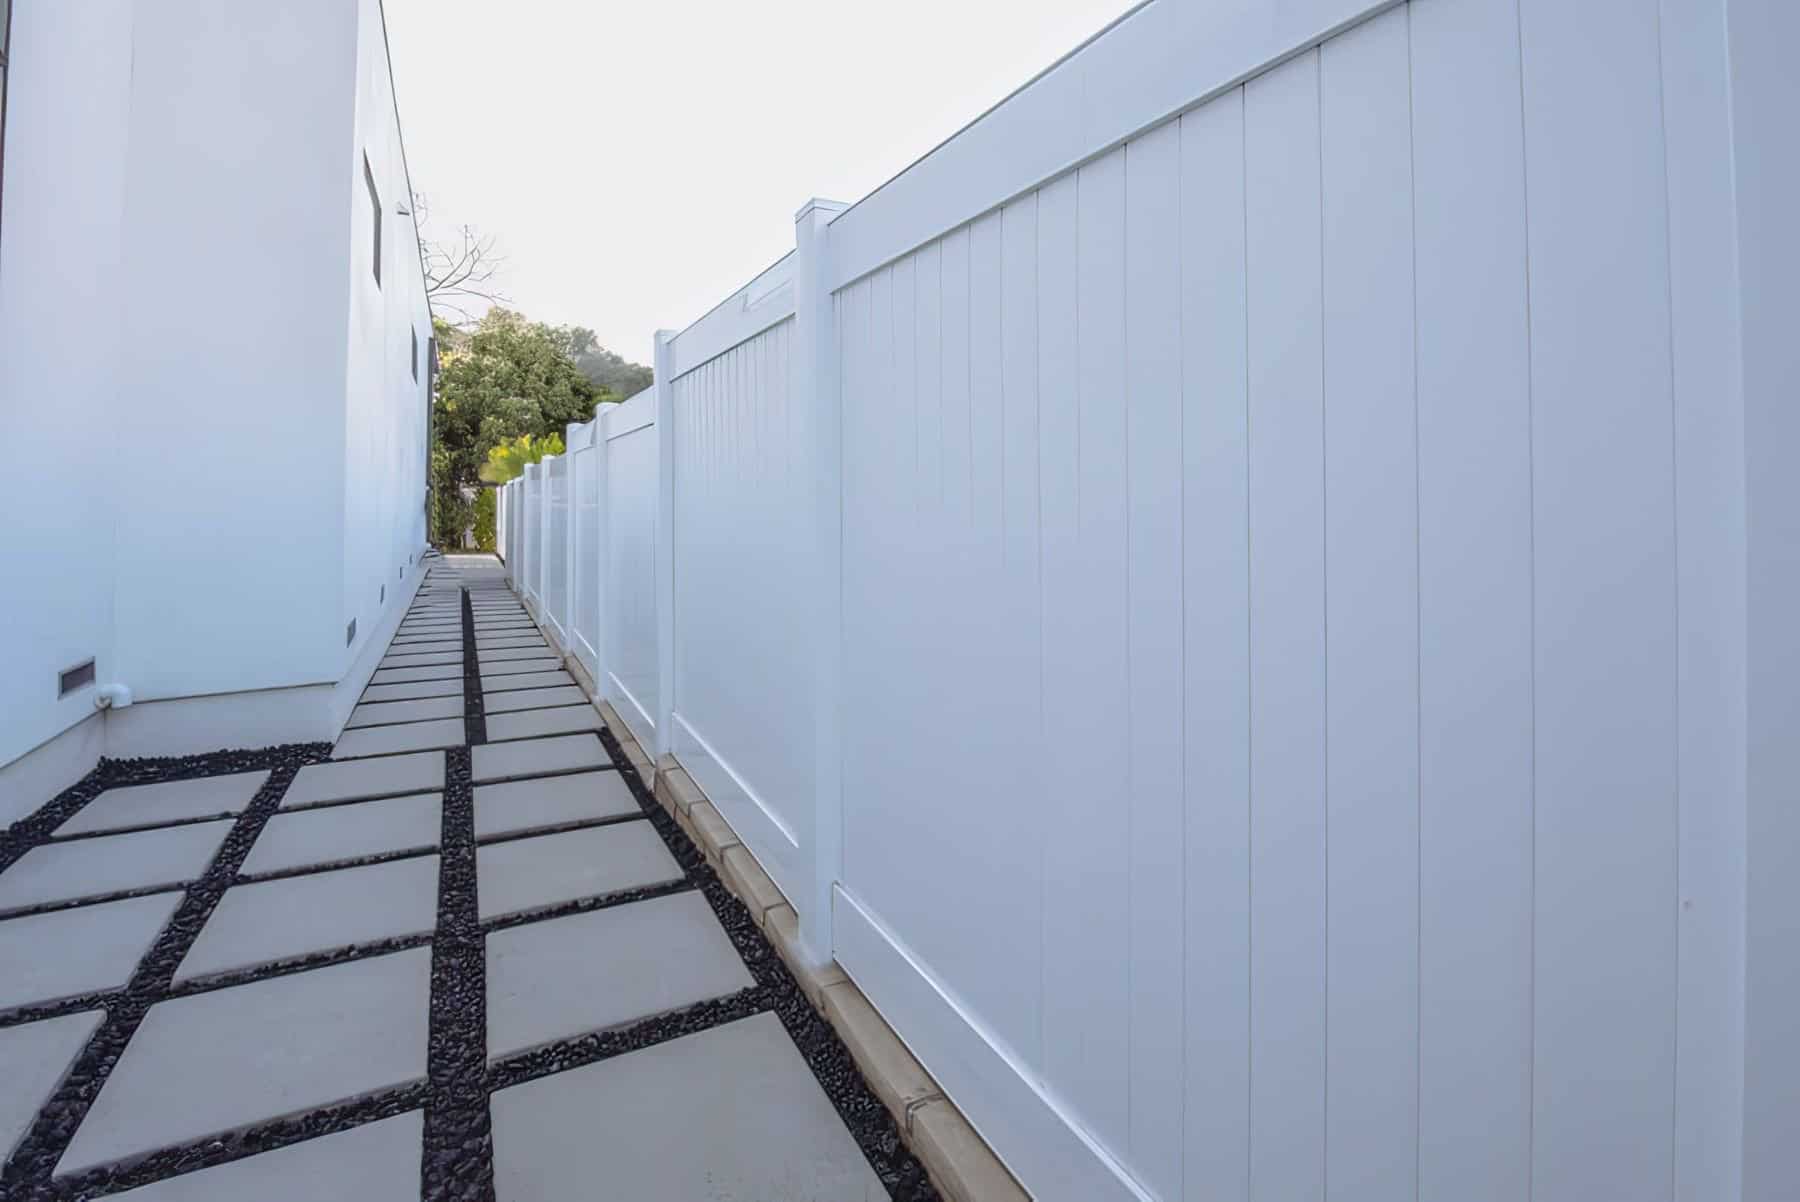 Vinyl privacy fence beside walkway with black stones and tiny black stones surround them against the white paint.